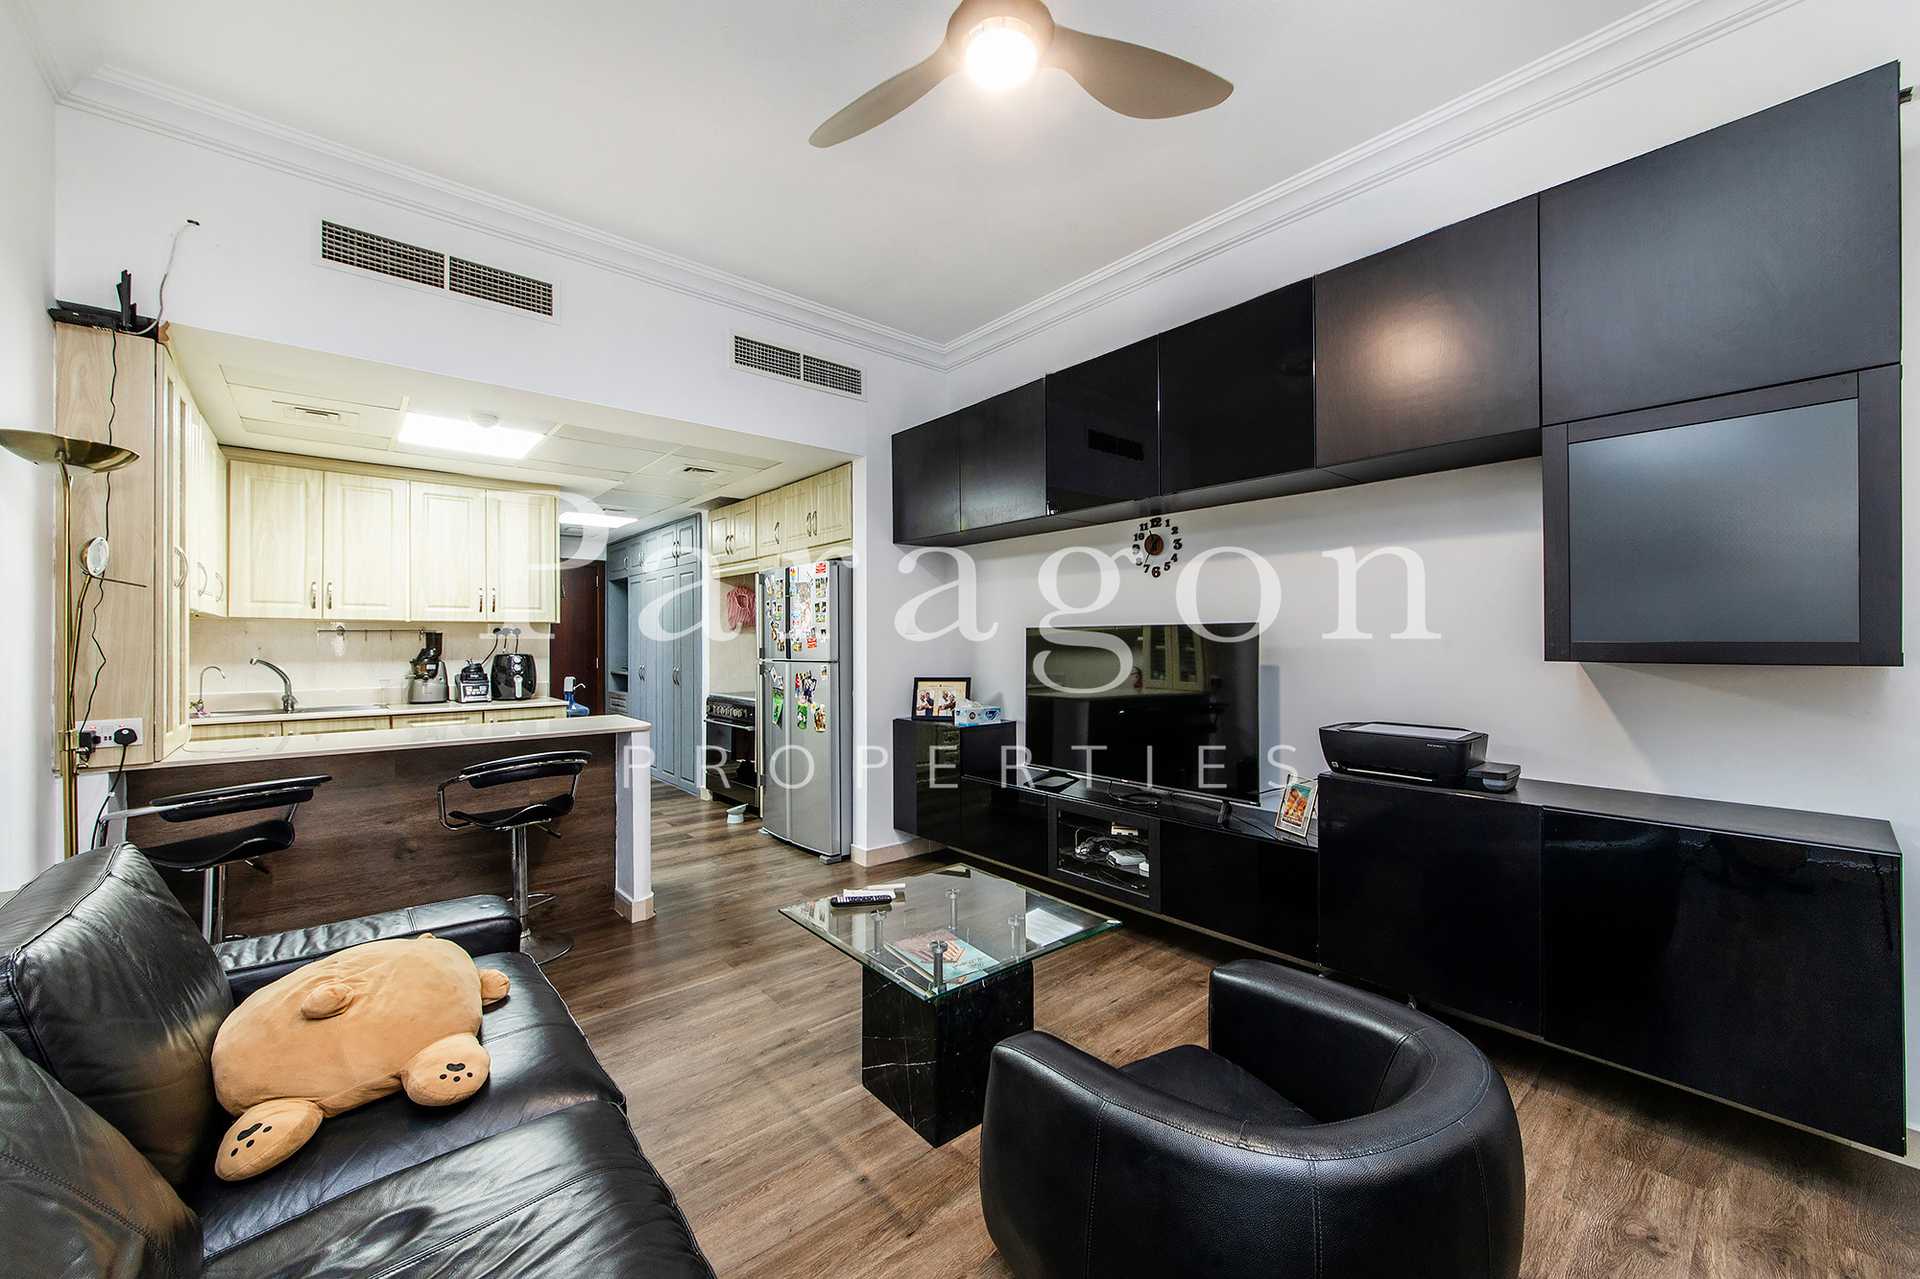 Condominium in Cooranbong, New South Wales 12447788